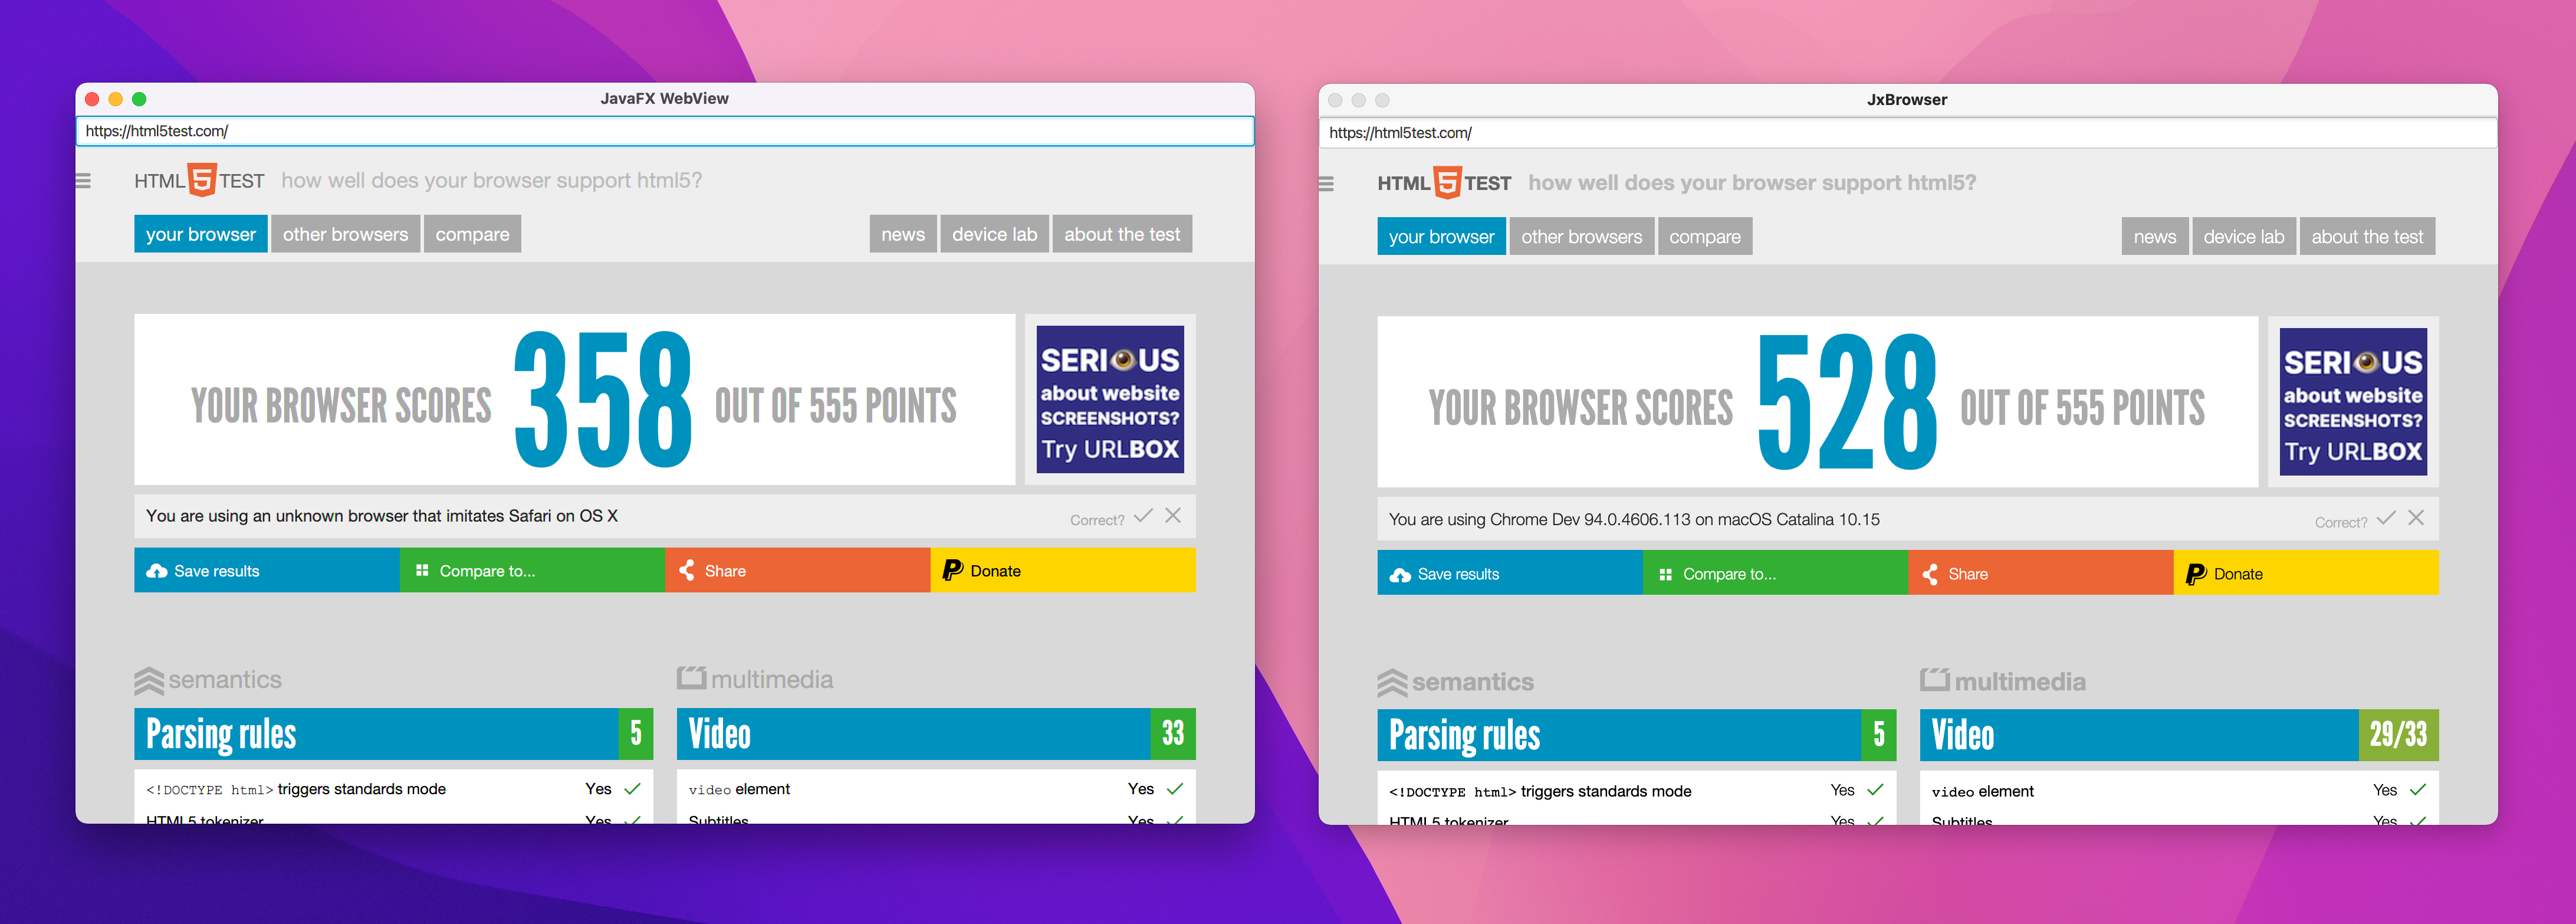 JavaFX WebView and JxBrowser HTML5 Scores